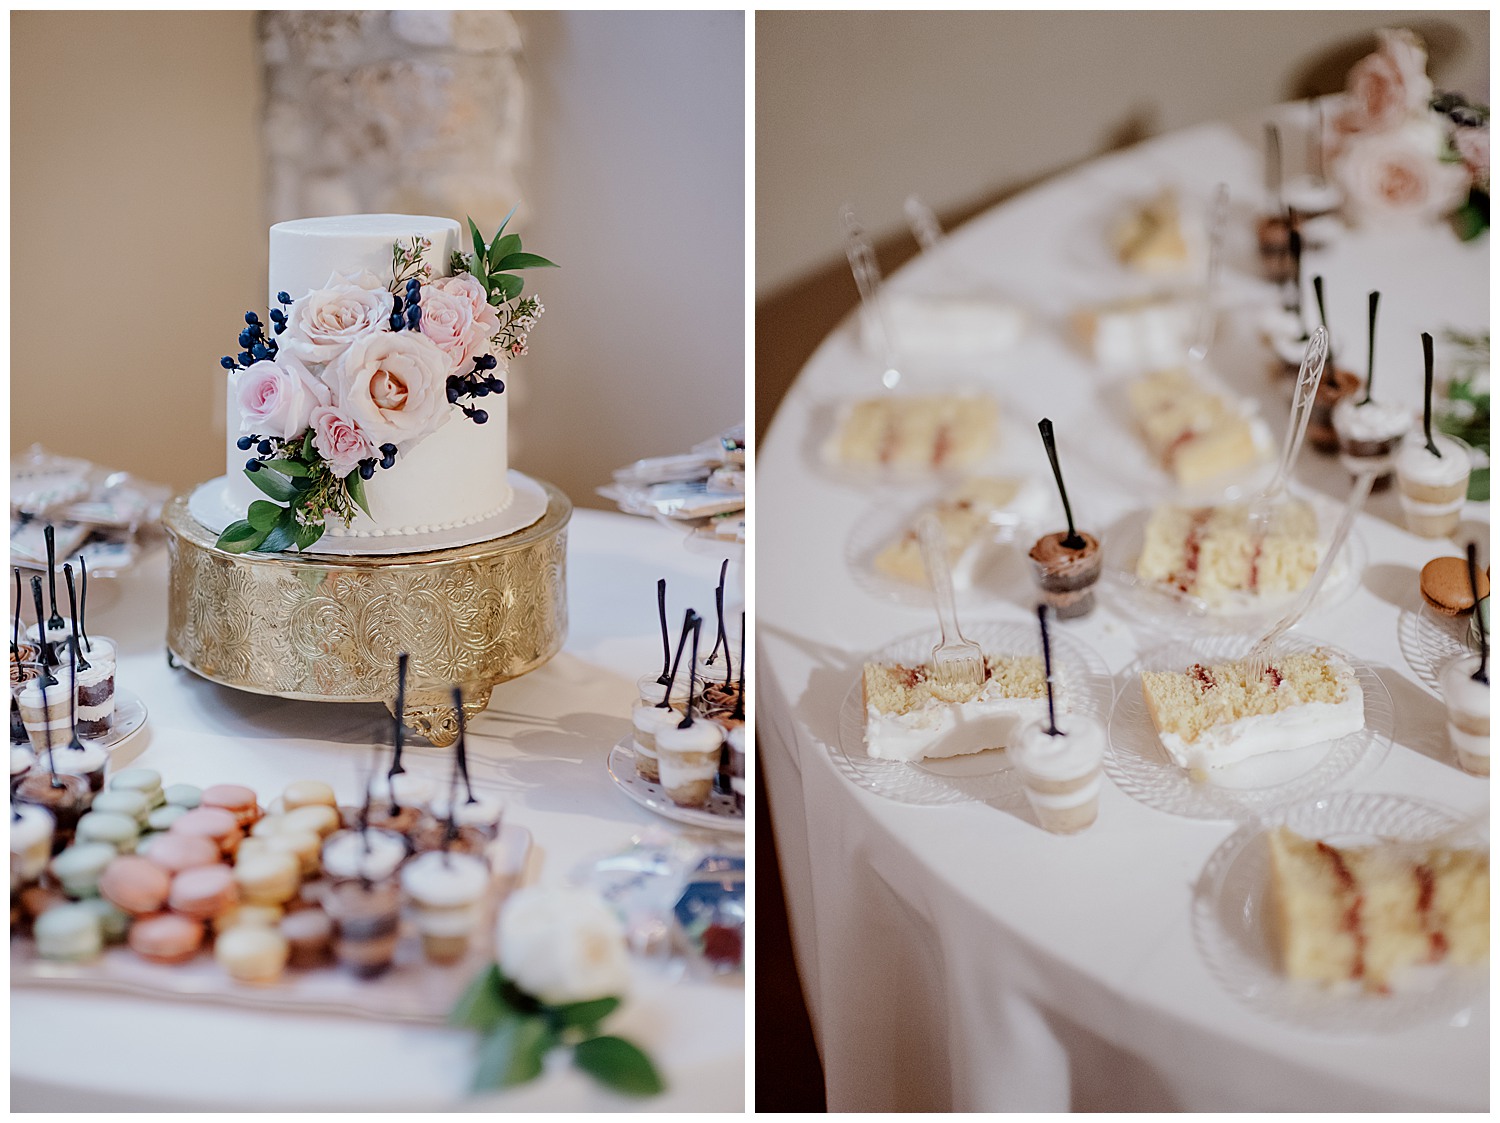 Super amazing detail shots of the wedding cake and sliced cake at the veranda